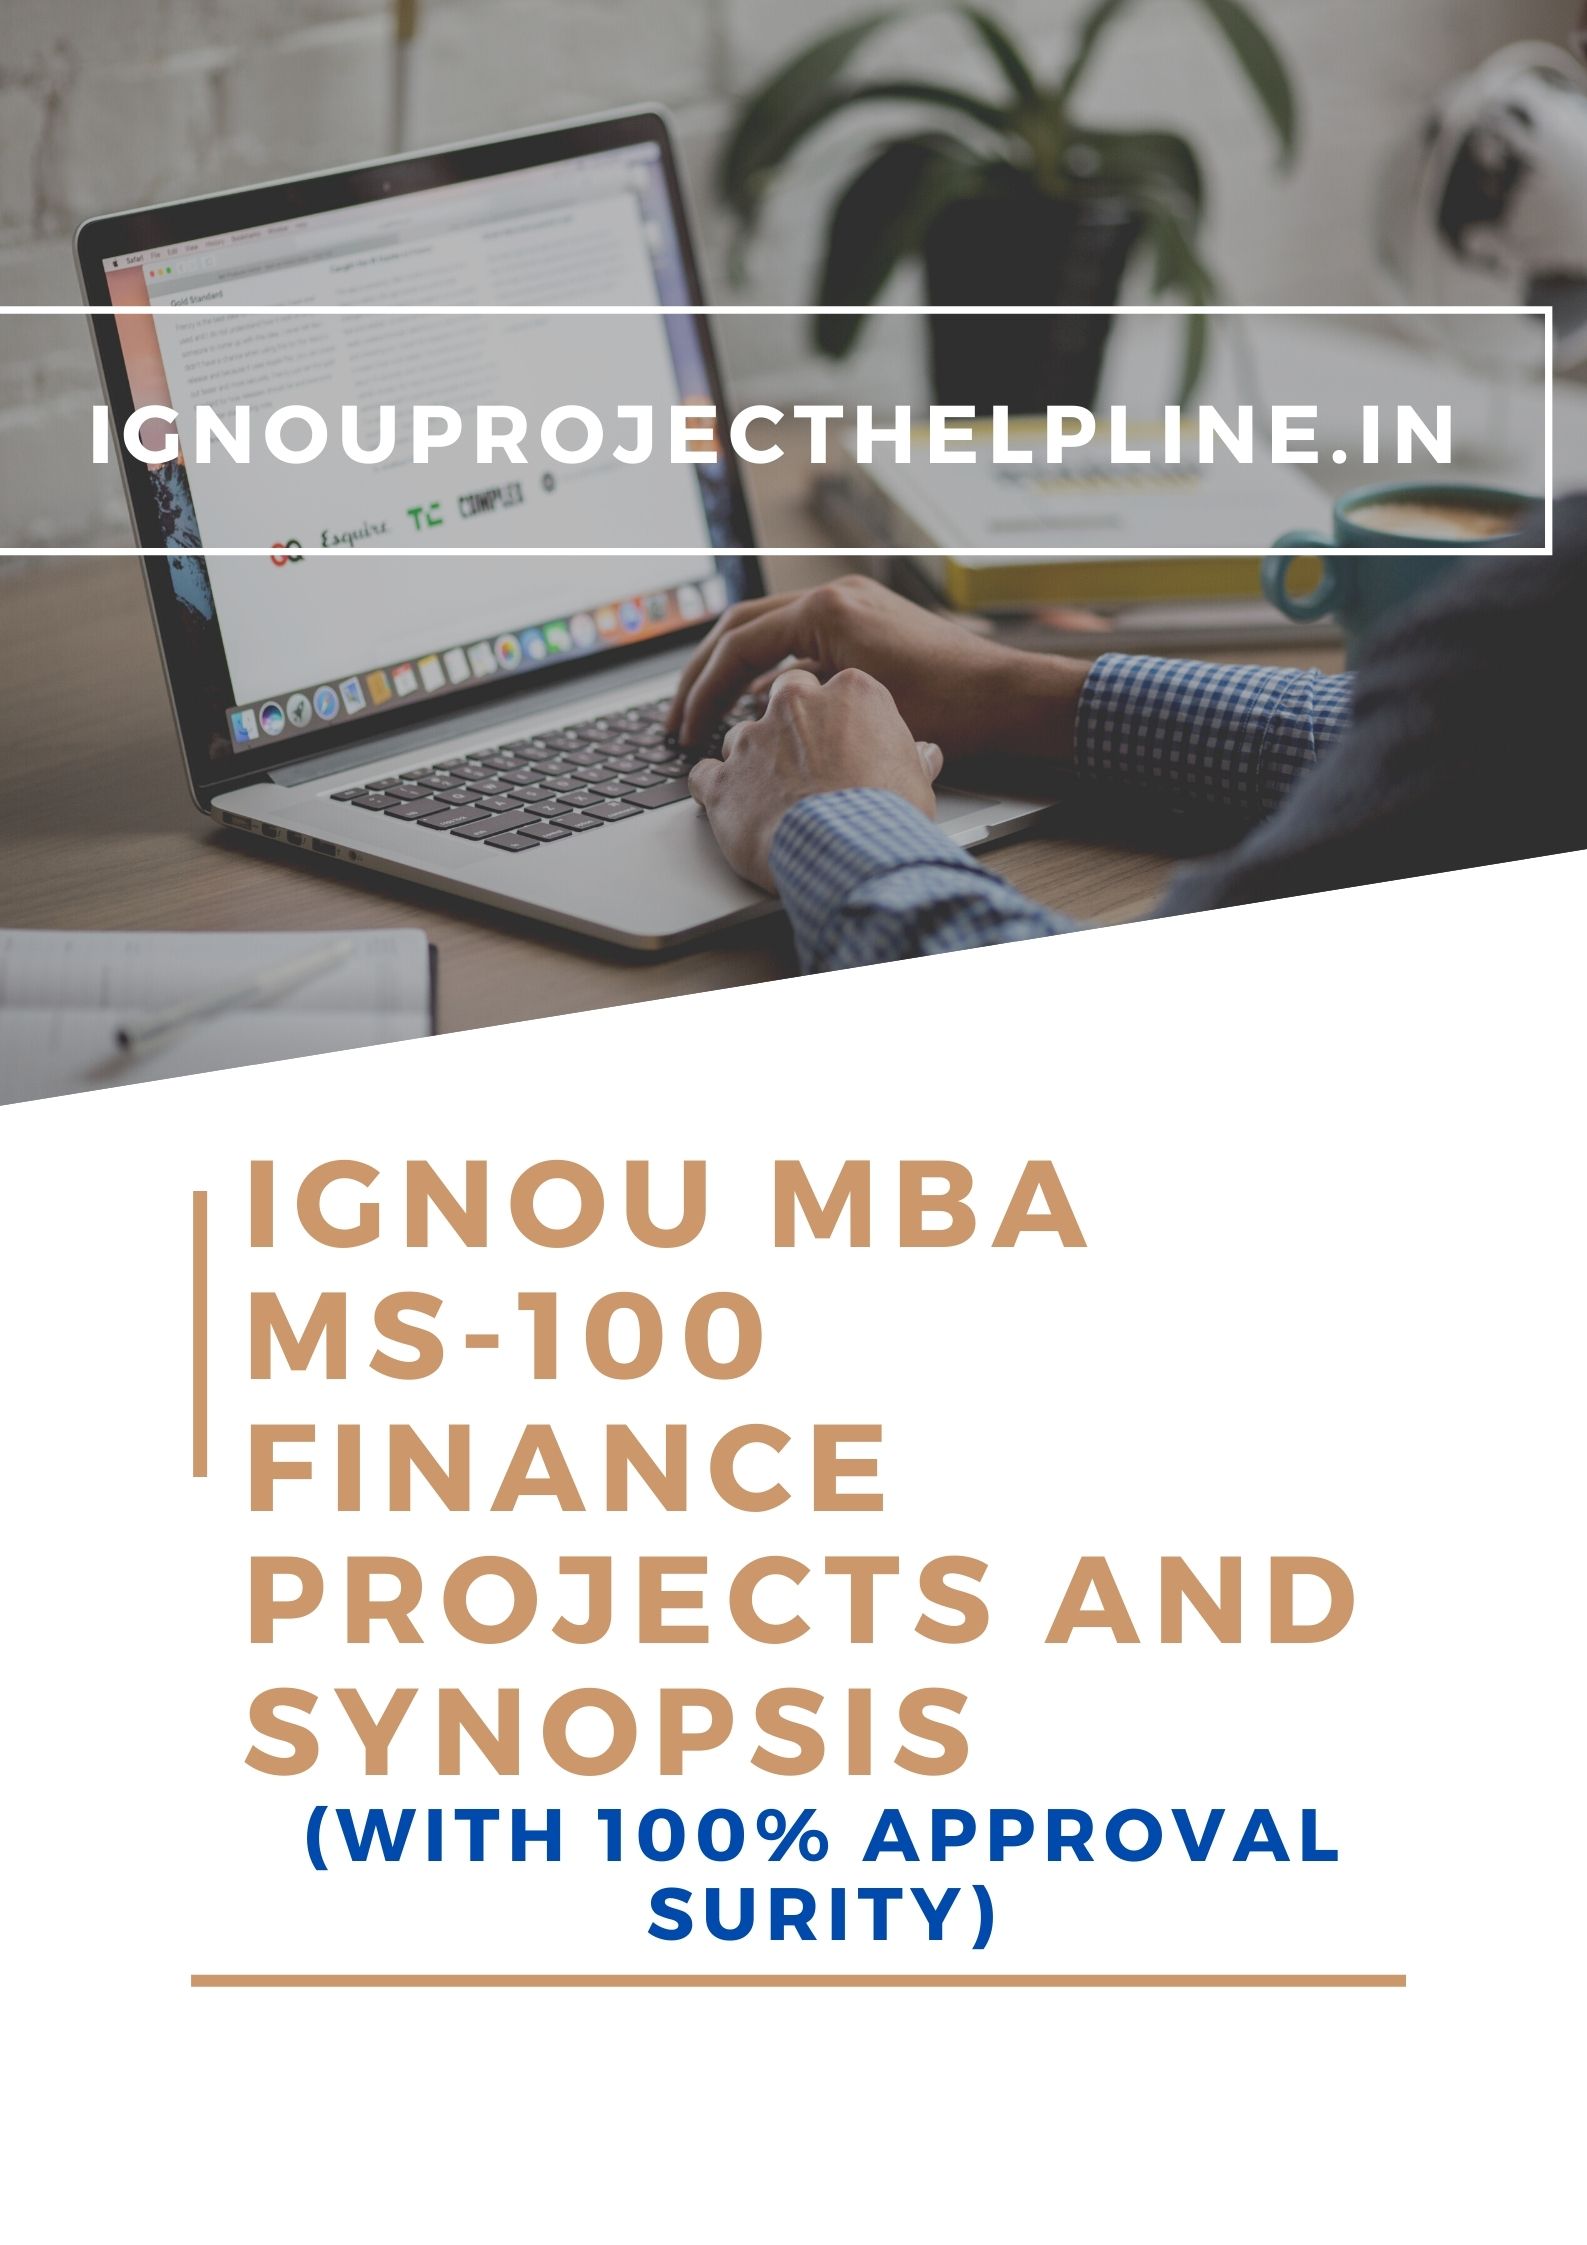 ignou mba ms-100 project